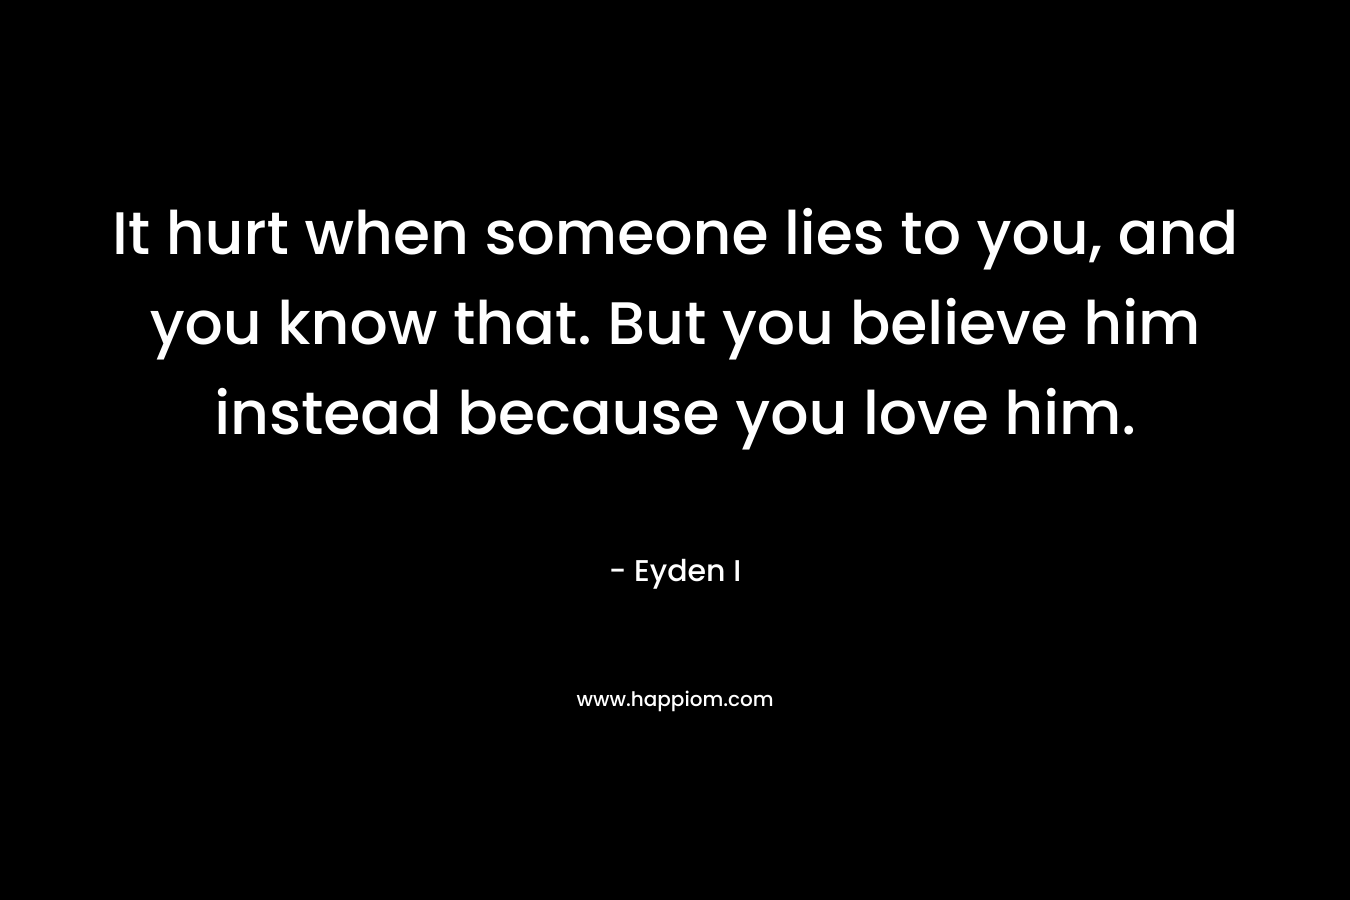 It hurt when someone lies to you, and you know that. But you believe him instead because you love him.